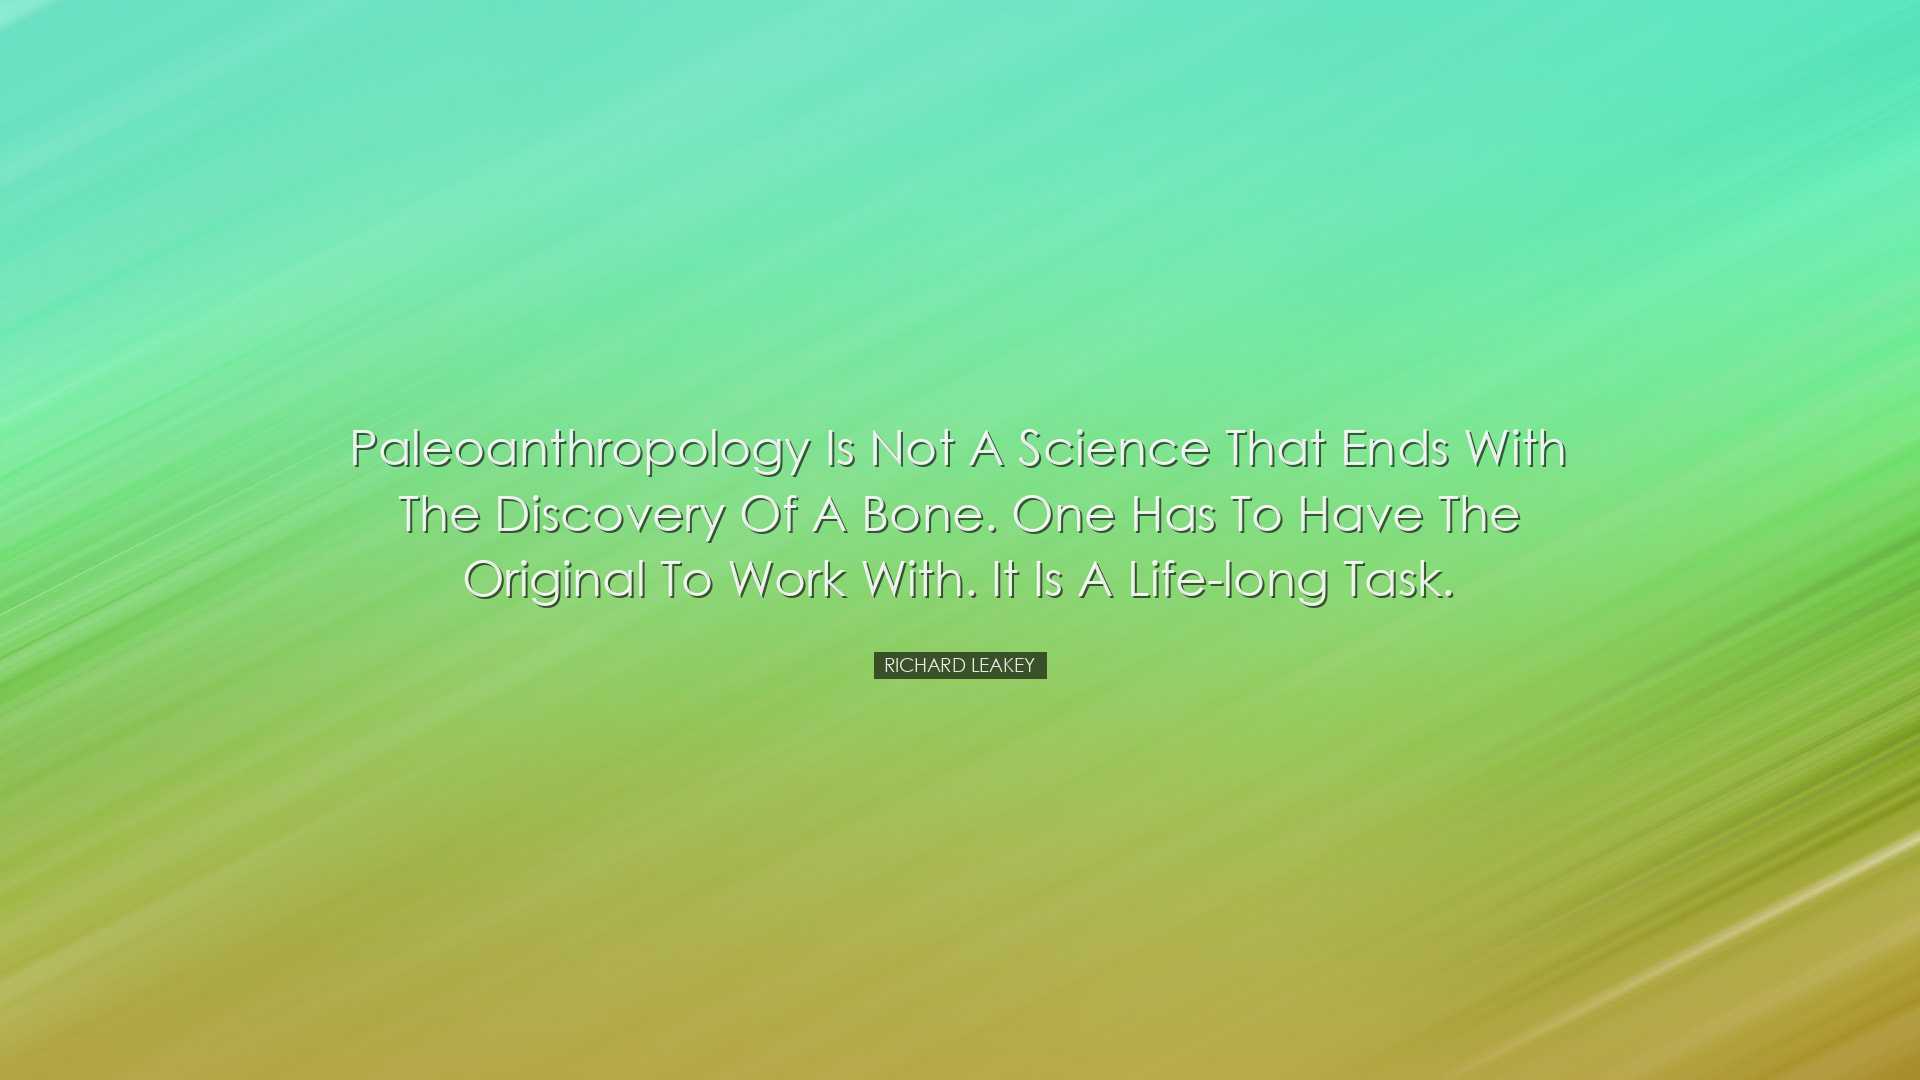 Paleoanthropology is not a science that ends with the discovery of